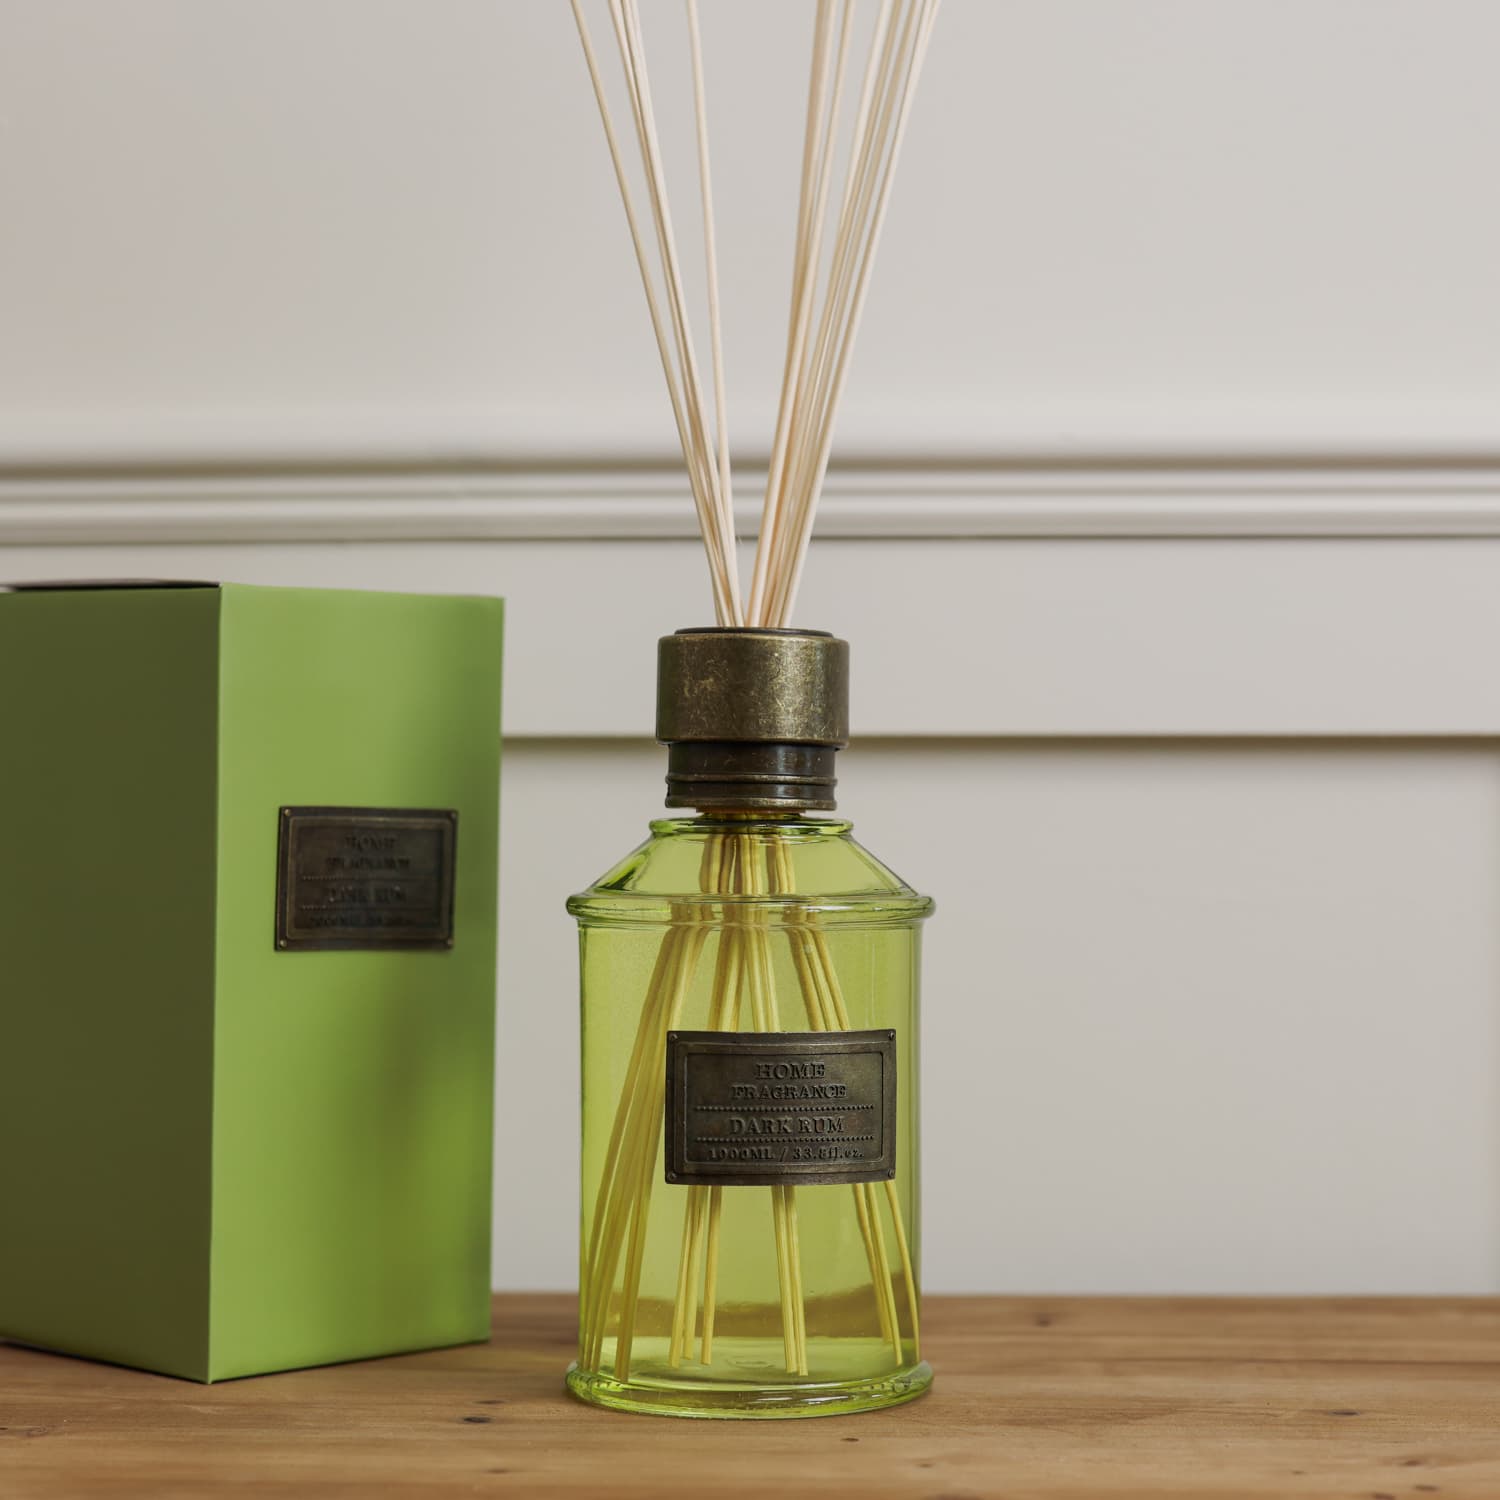 Home fragrance dark rum and lime green reed diffuser on wooden console with presentation box